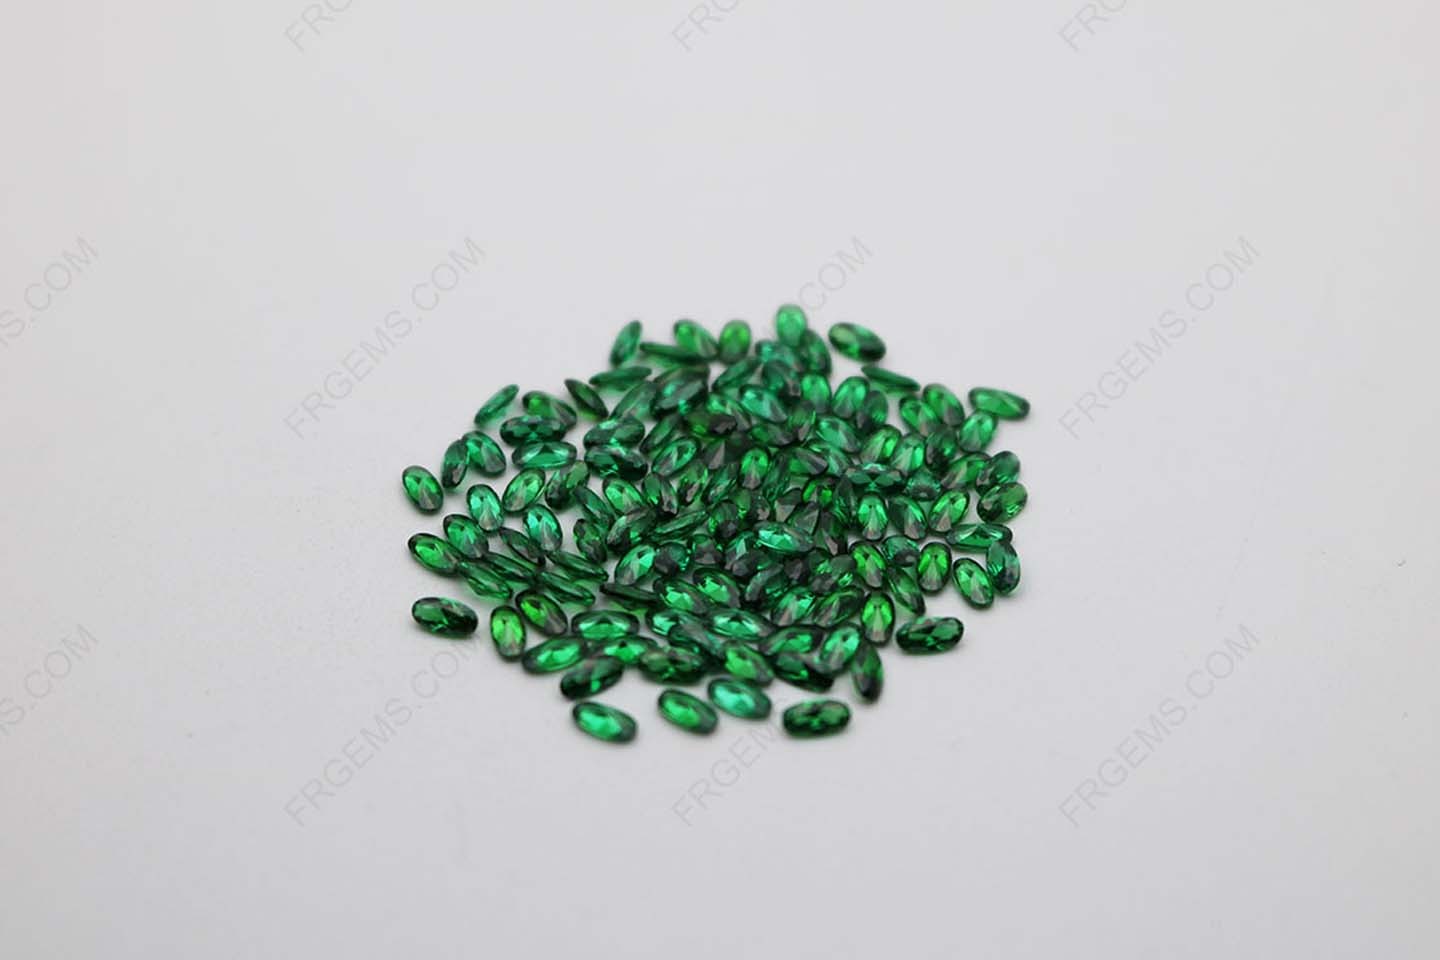 Cubic_Zirconia_Green_Oval_Shape_Faceted_Cut_4x2mm_stones_IMG_1035